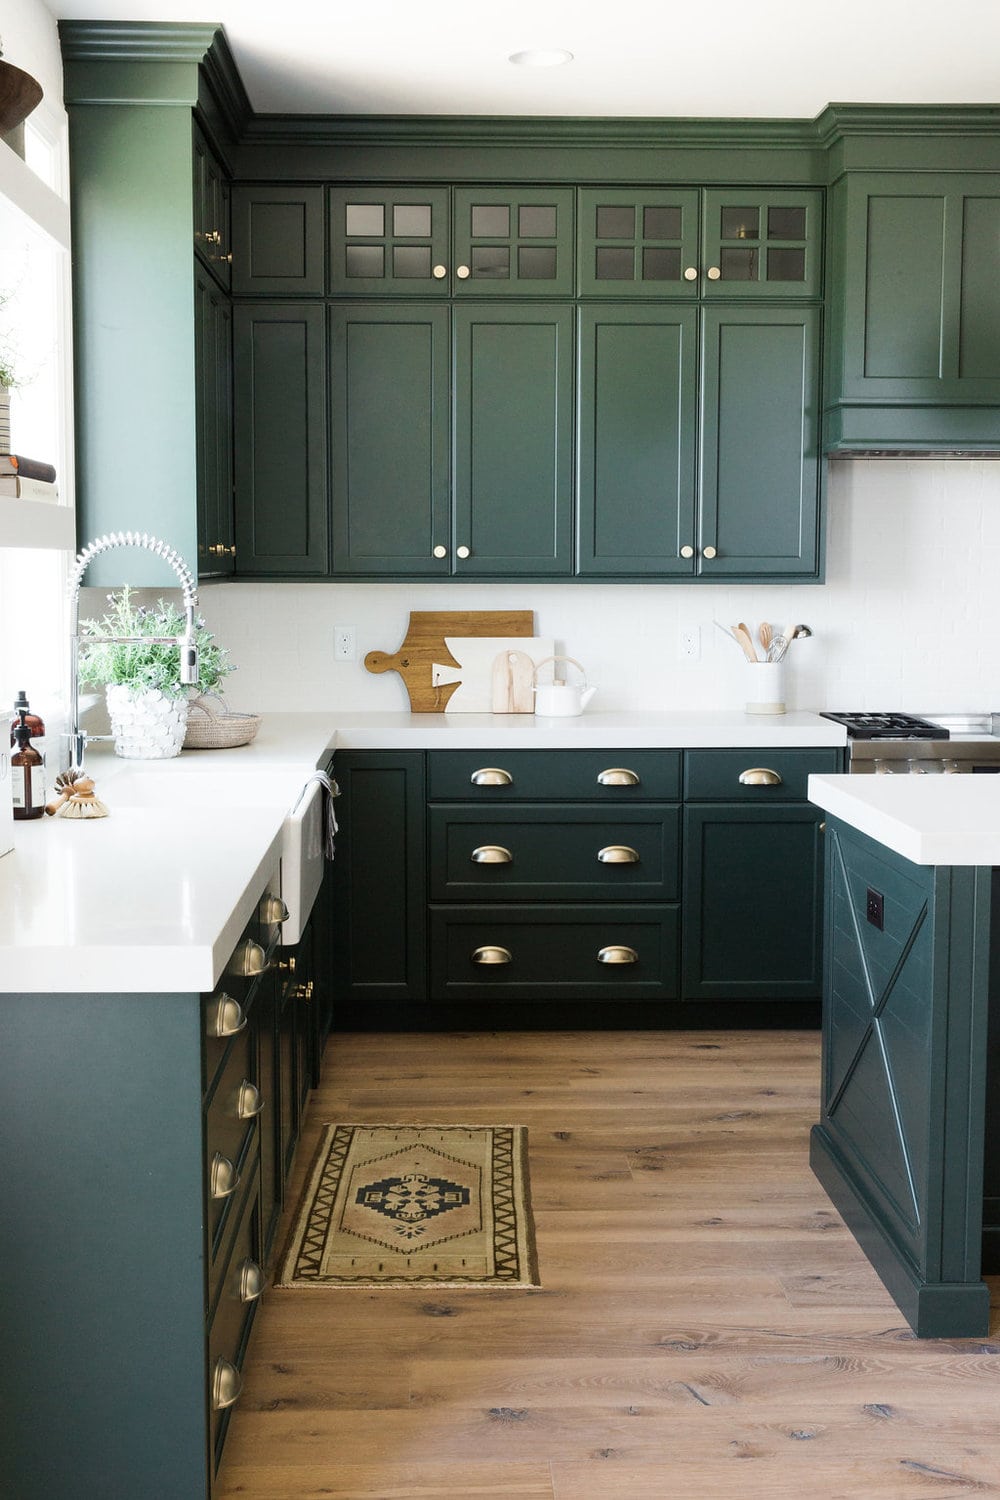 Glossy kitchen cabinets painted dark green color Dunn Edwards Black Spruce